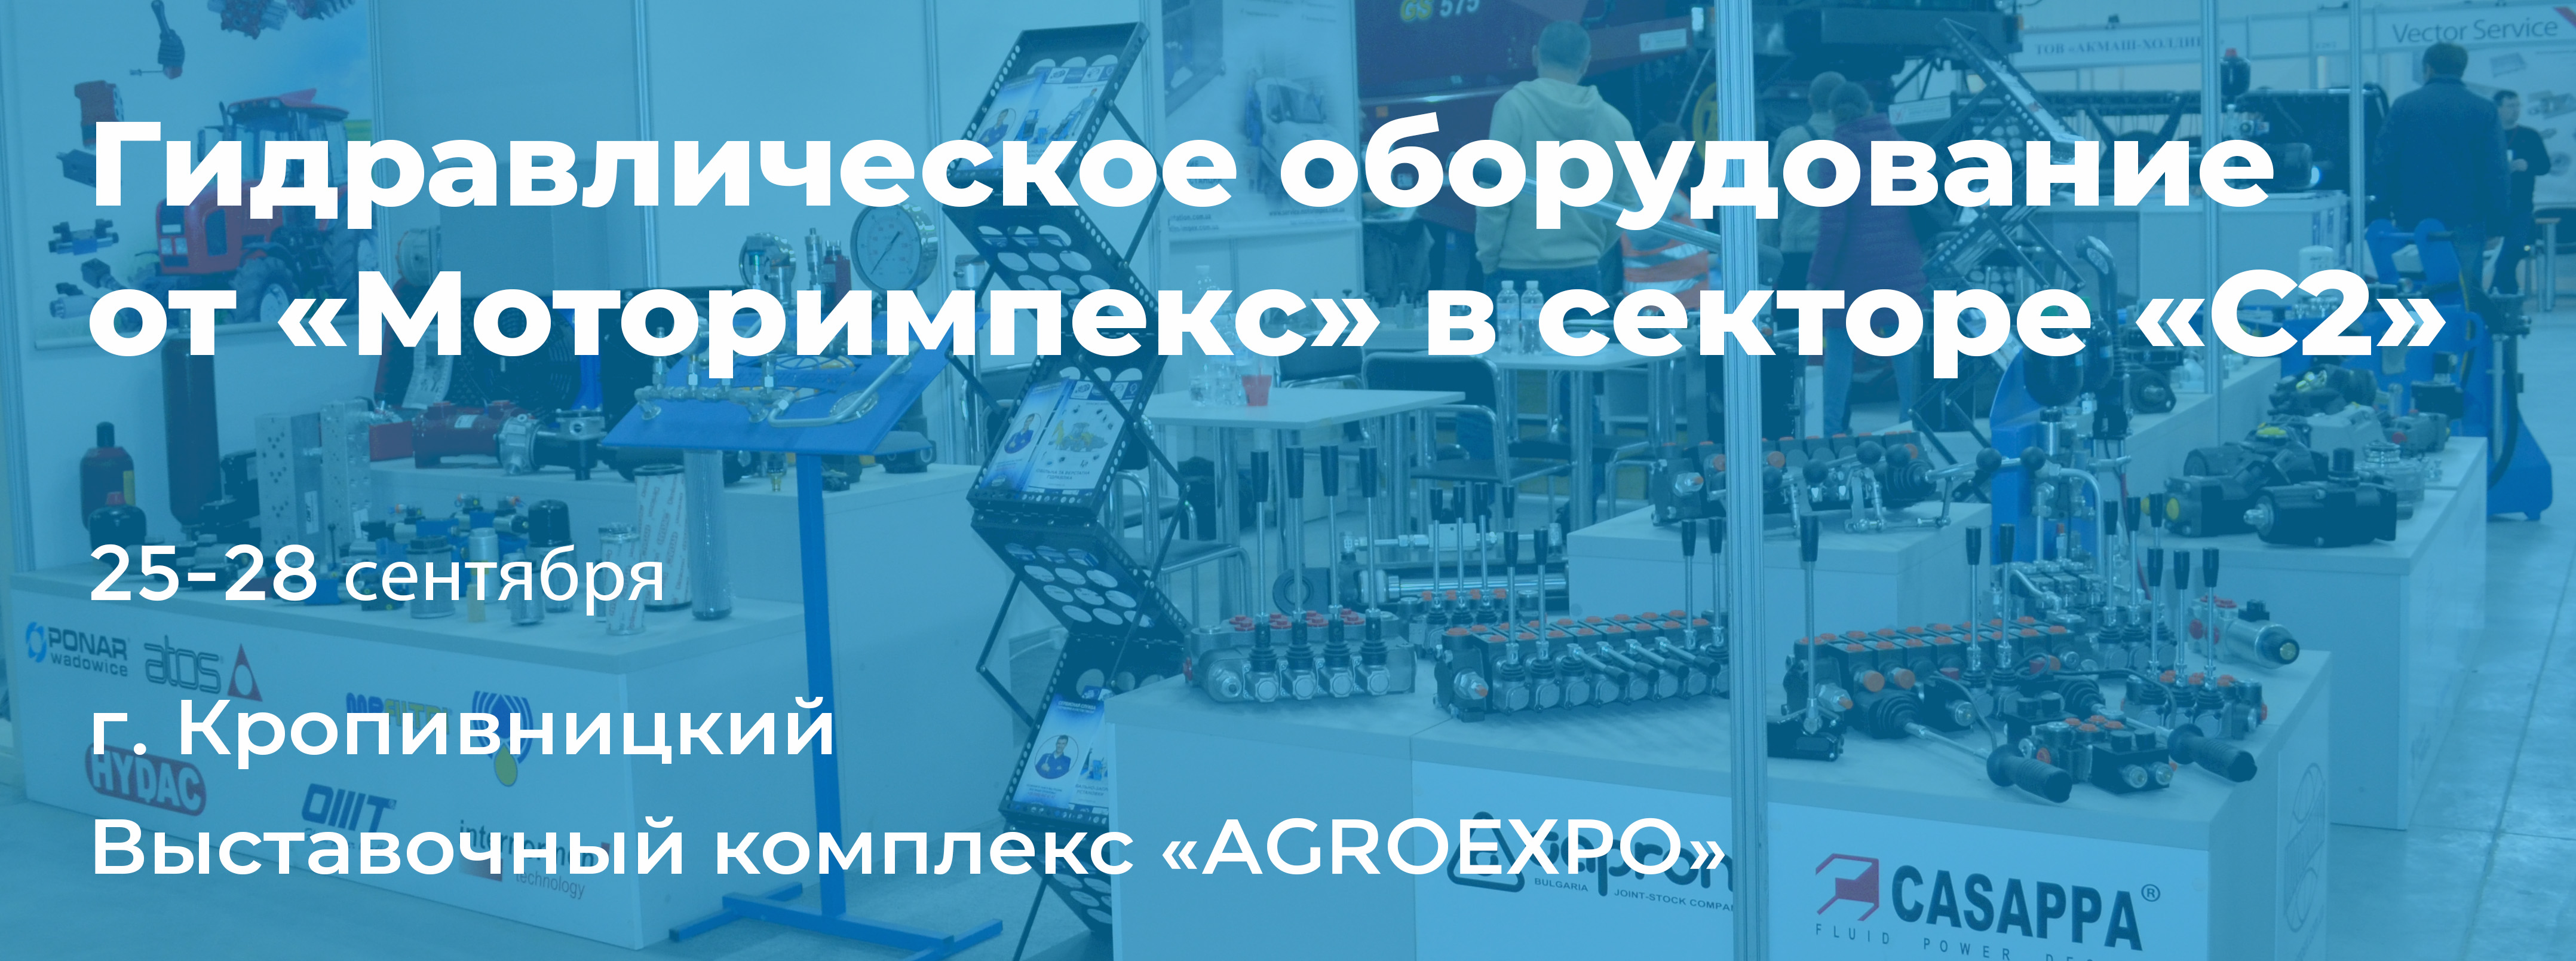 Reciving consultations of hydraulic engineers for 4 days at the «Agroexpo-2019» exhibition